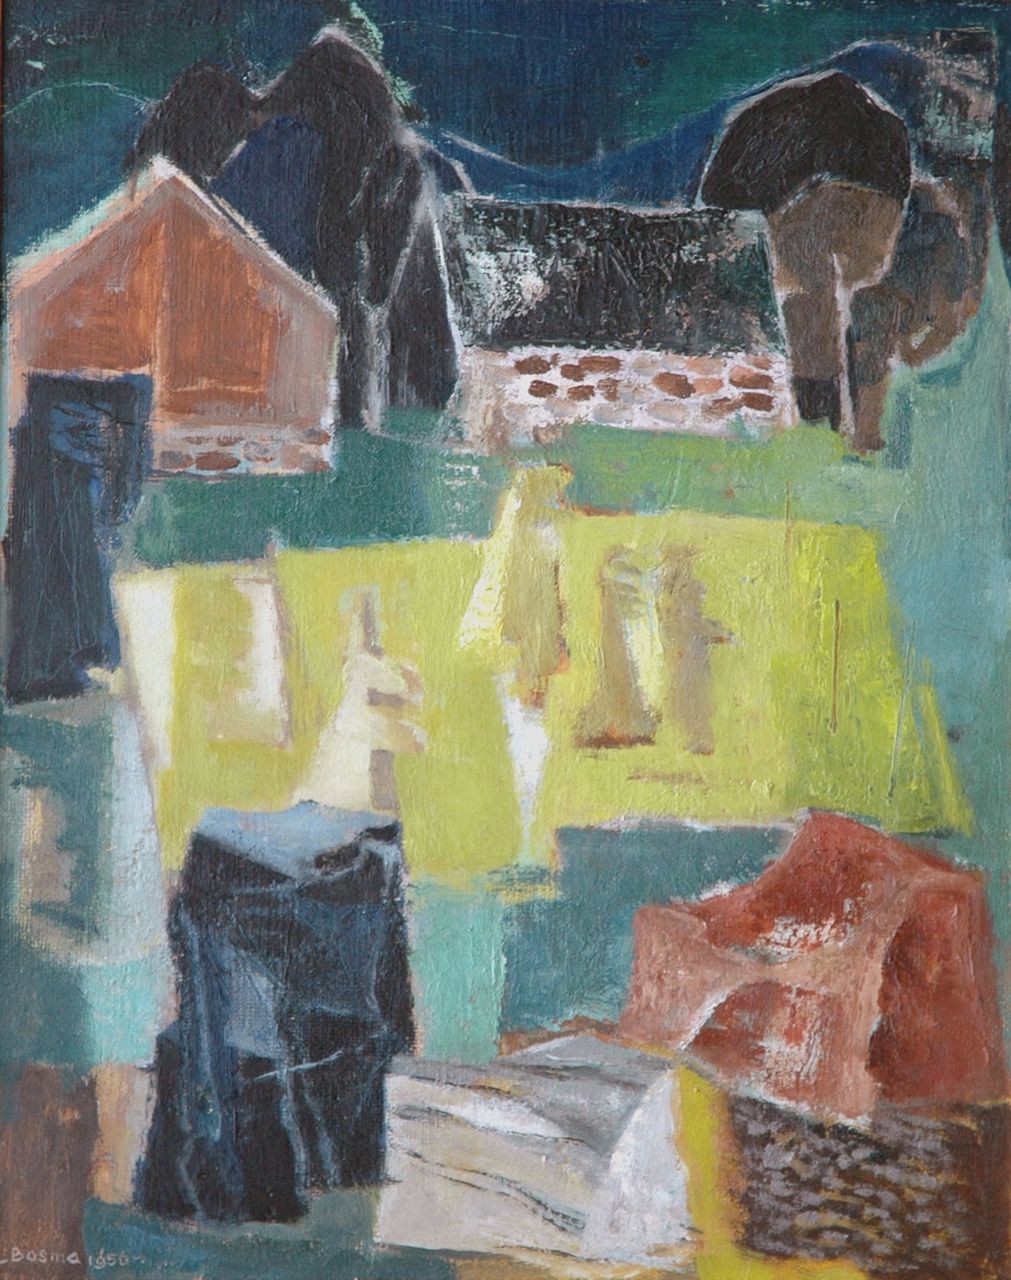 Bosma W.  | Willem 'Wim' Bosma, Stones, sheafs of corn and a farm, oil on painter's board 50.0 x 40.0 cm, signed l.l. and painted 1956